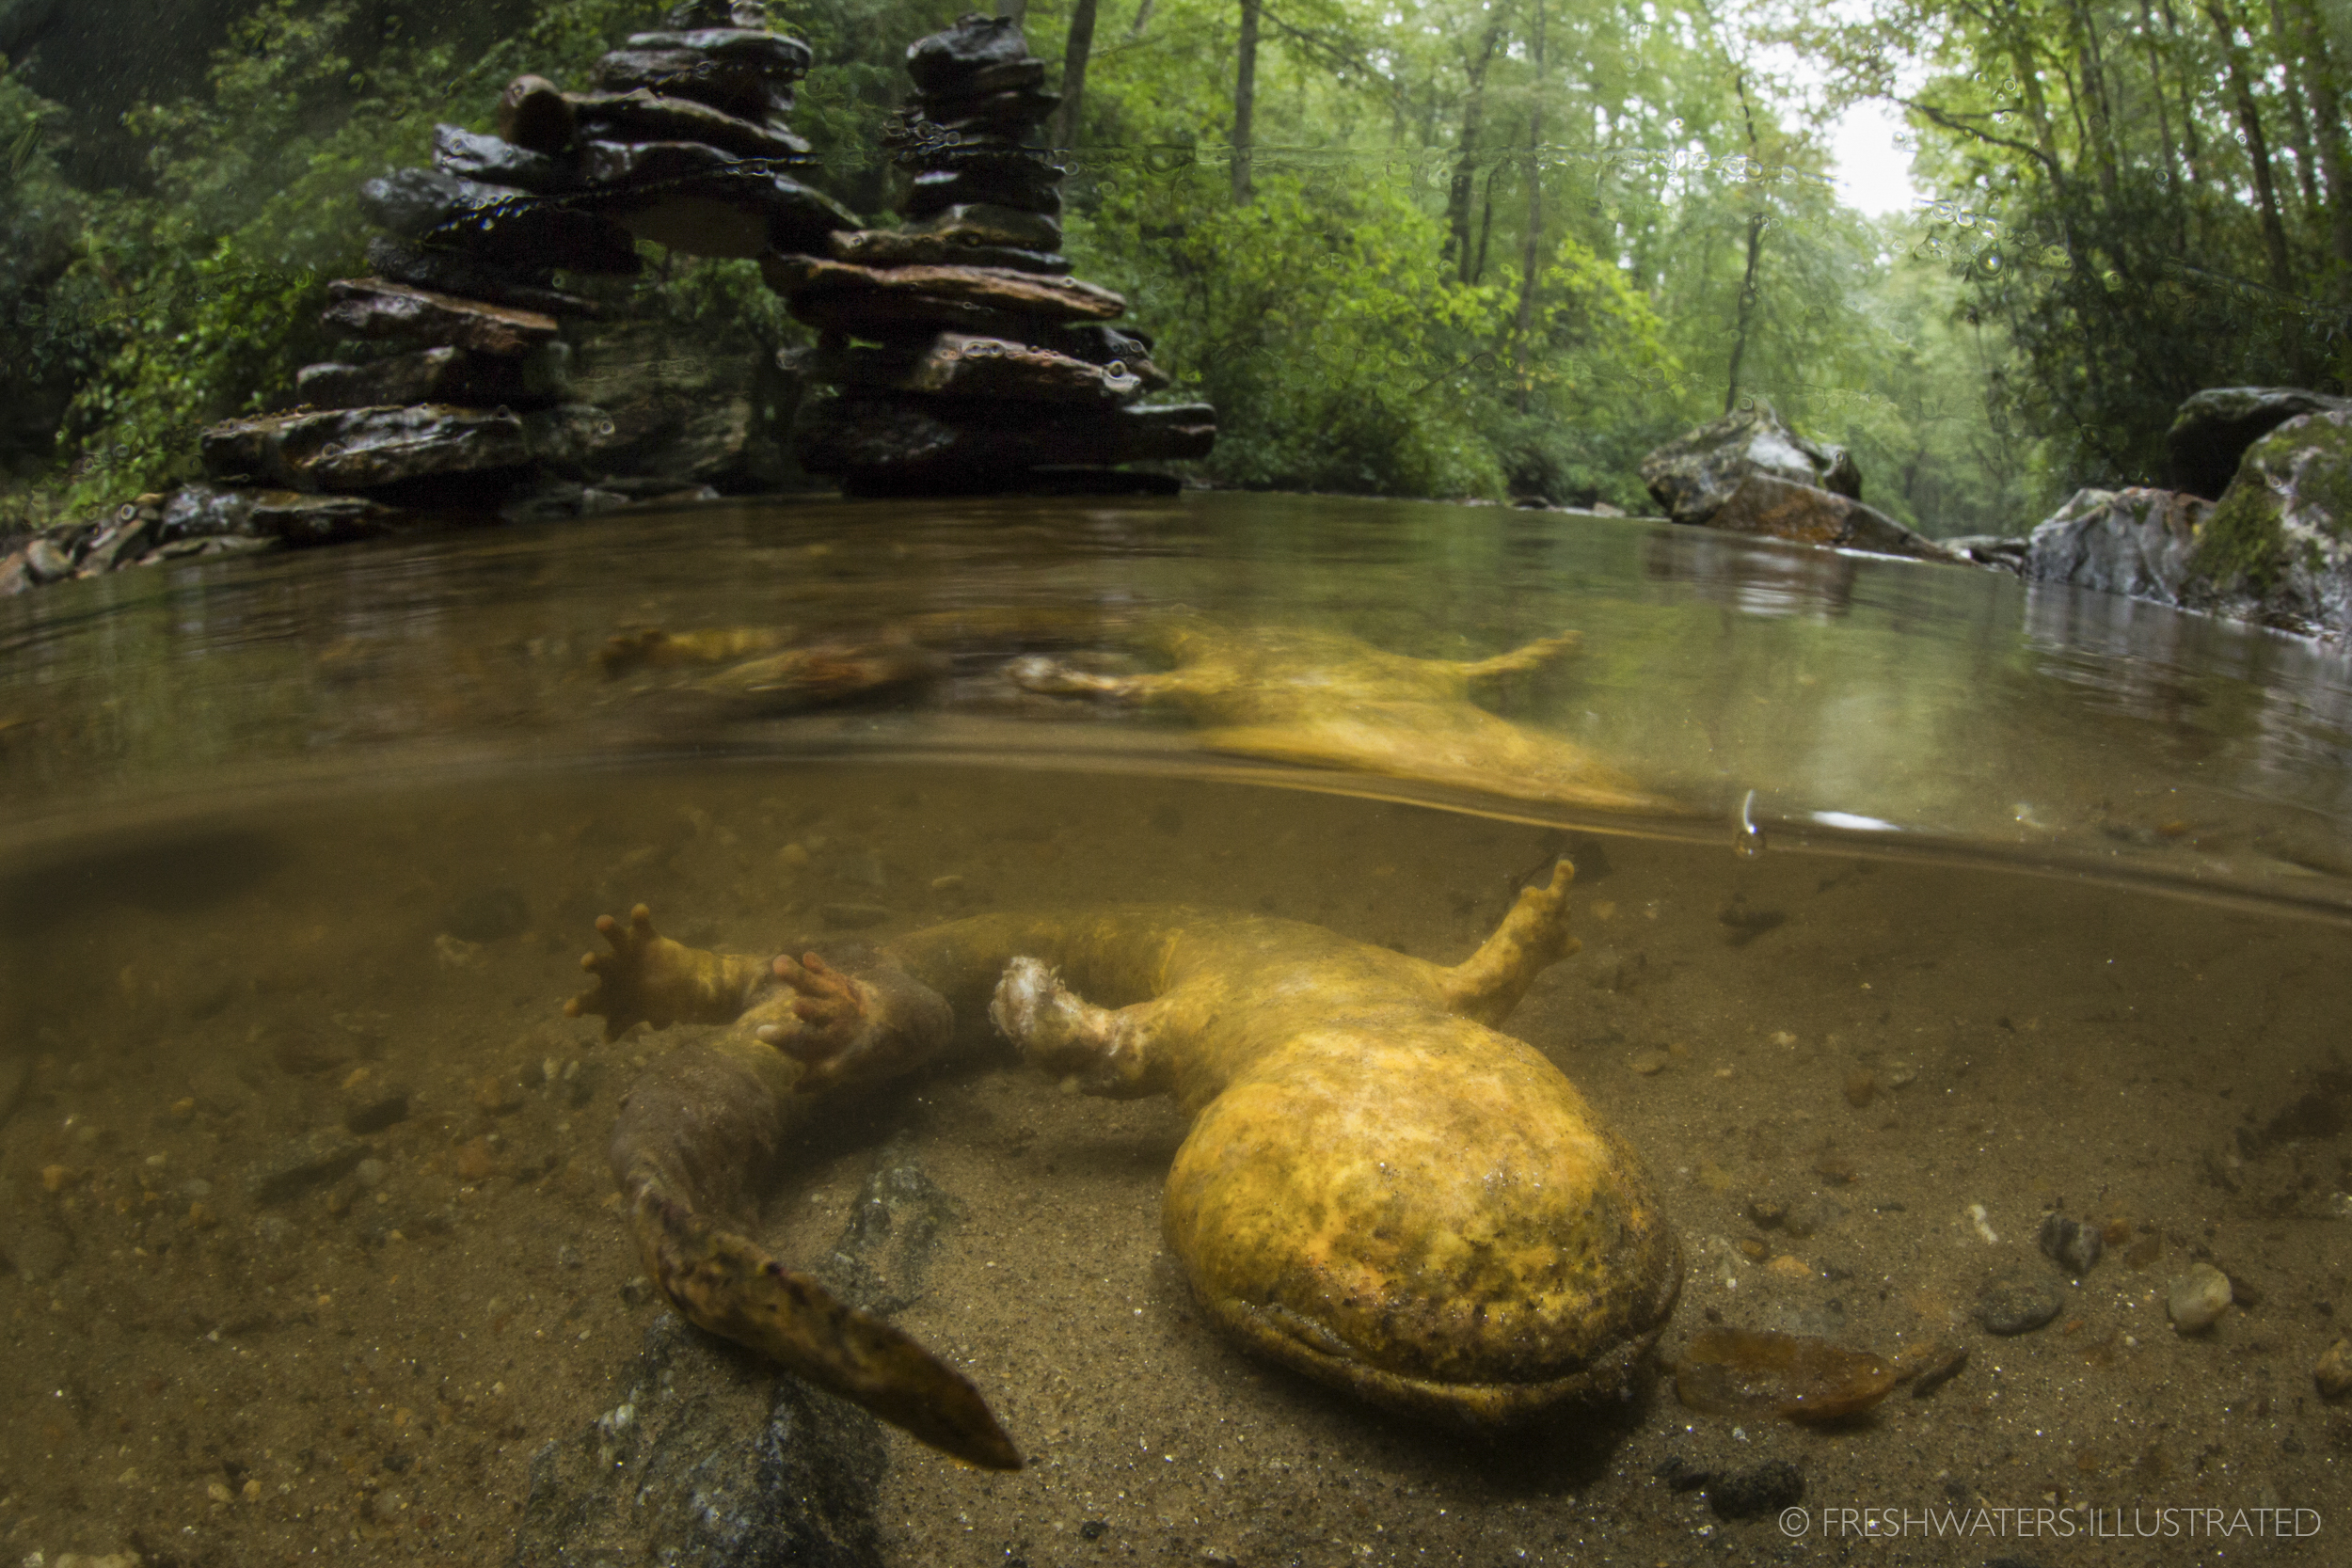  Unfortunately most people are unaware of the detrimental impacts that can come from moving rocks in a river to build dams or rock sculptures. The death of this female hellbender was the result of people moving large flat rocks to build a rock sculpt